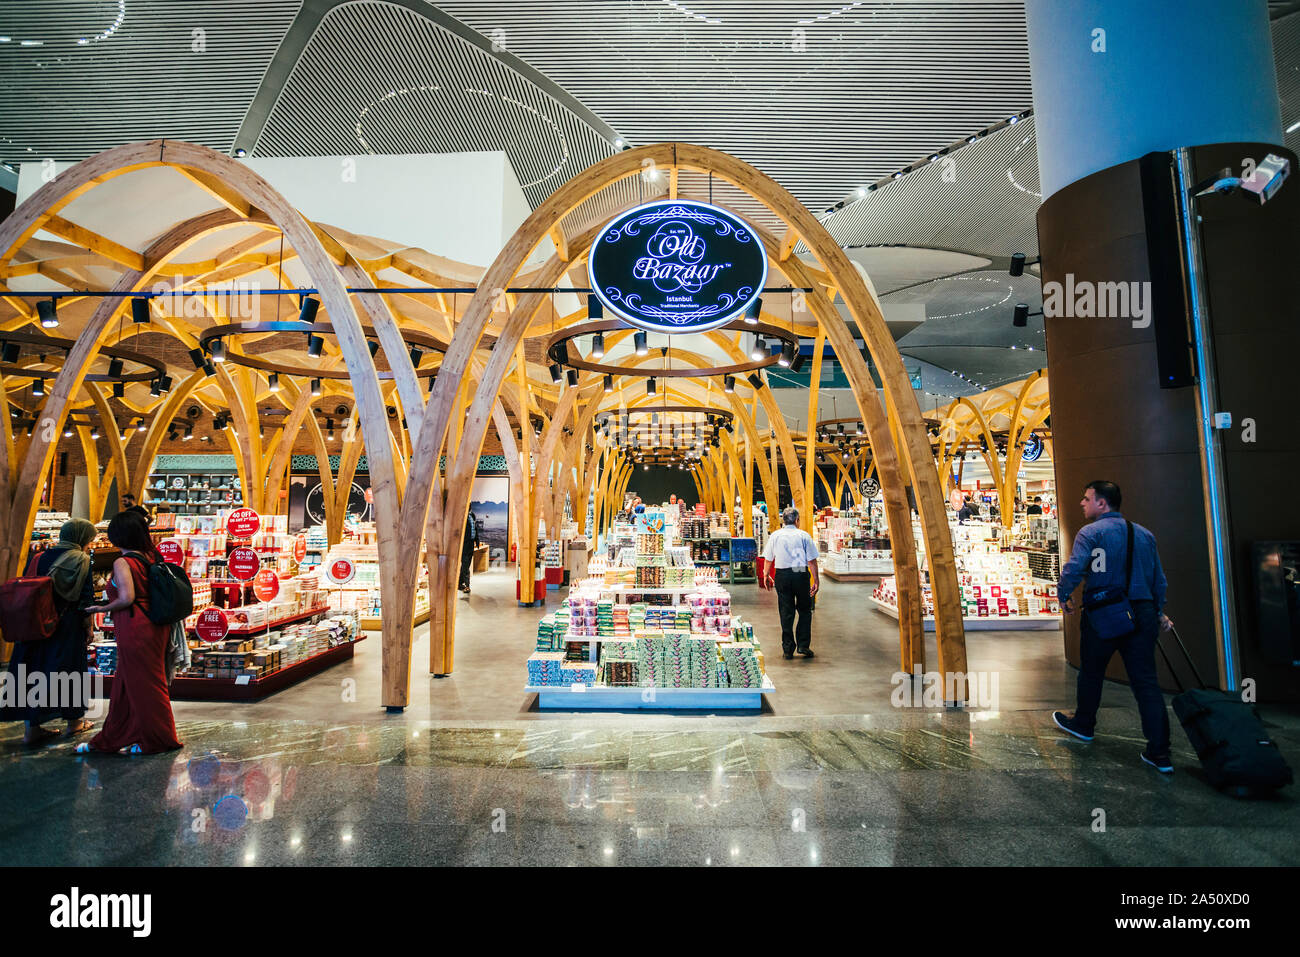 ISTANBUL,TURKEY,AUGUST 02, 2019: Interior view of the Istanbul new airport.  New Istanbul Airport is the main international airport located in Istanbu Stock Photo